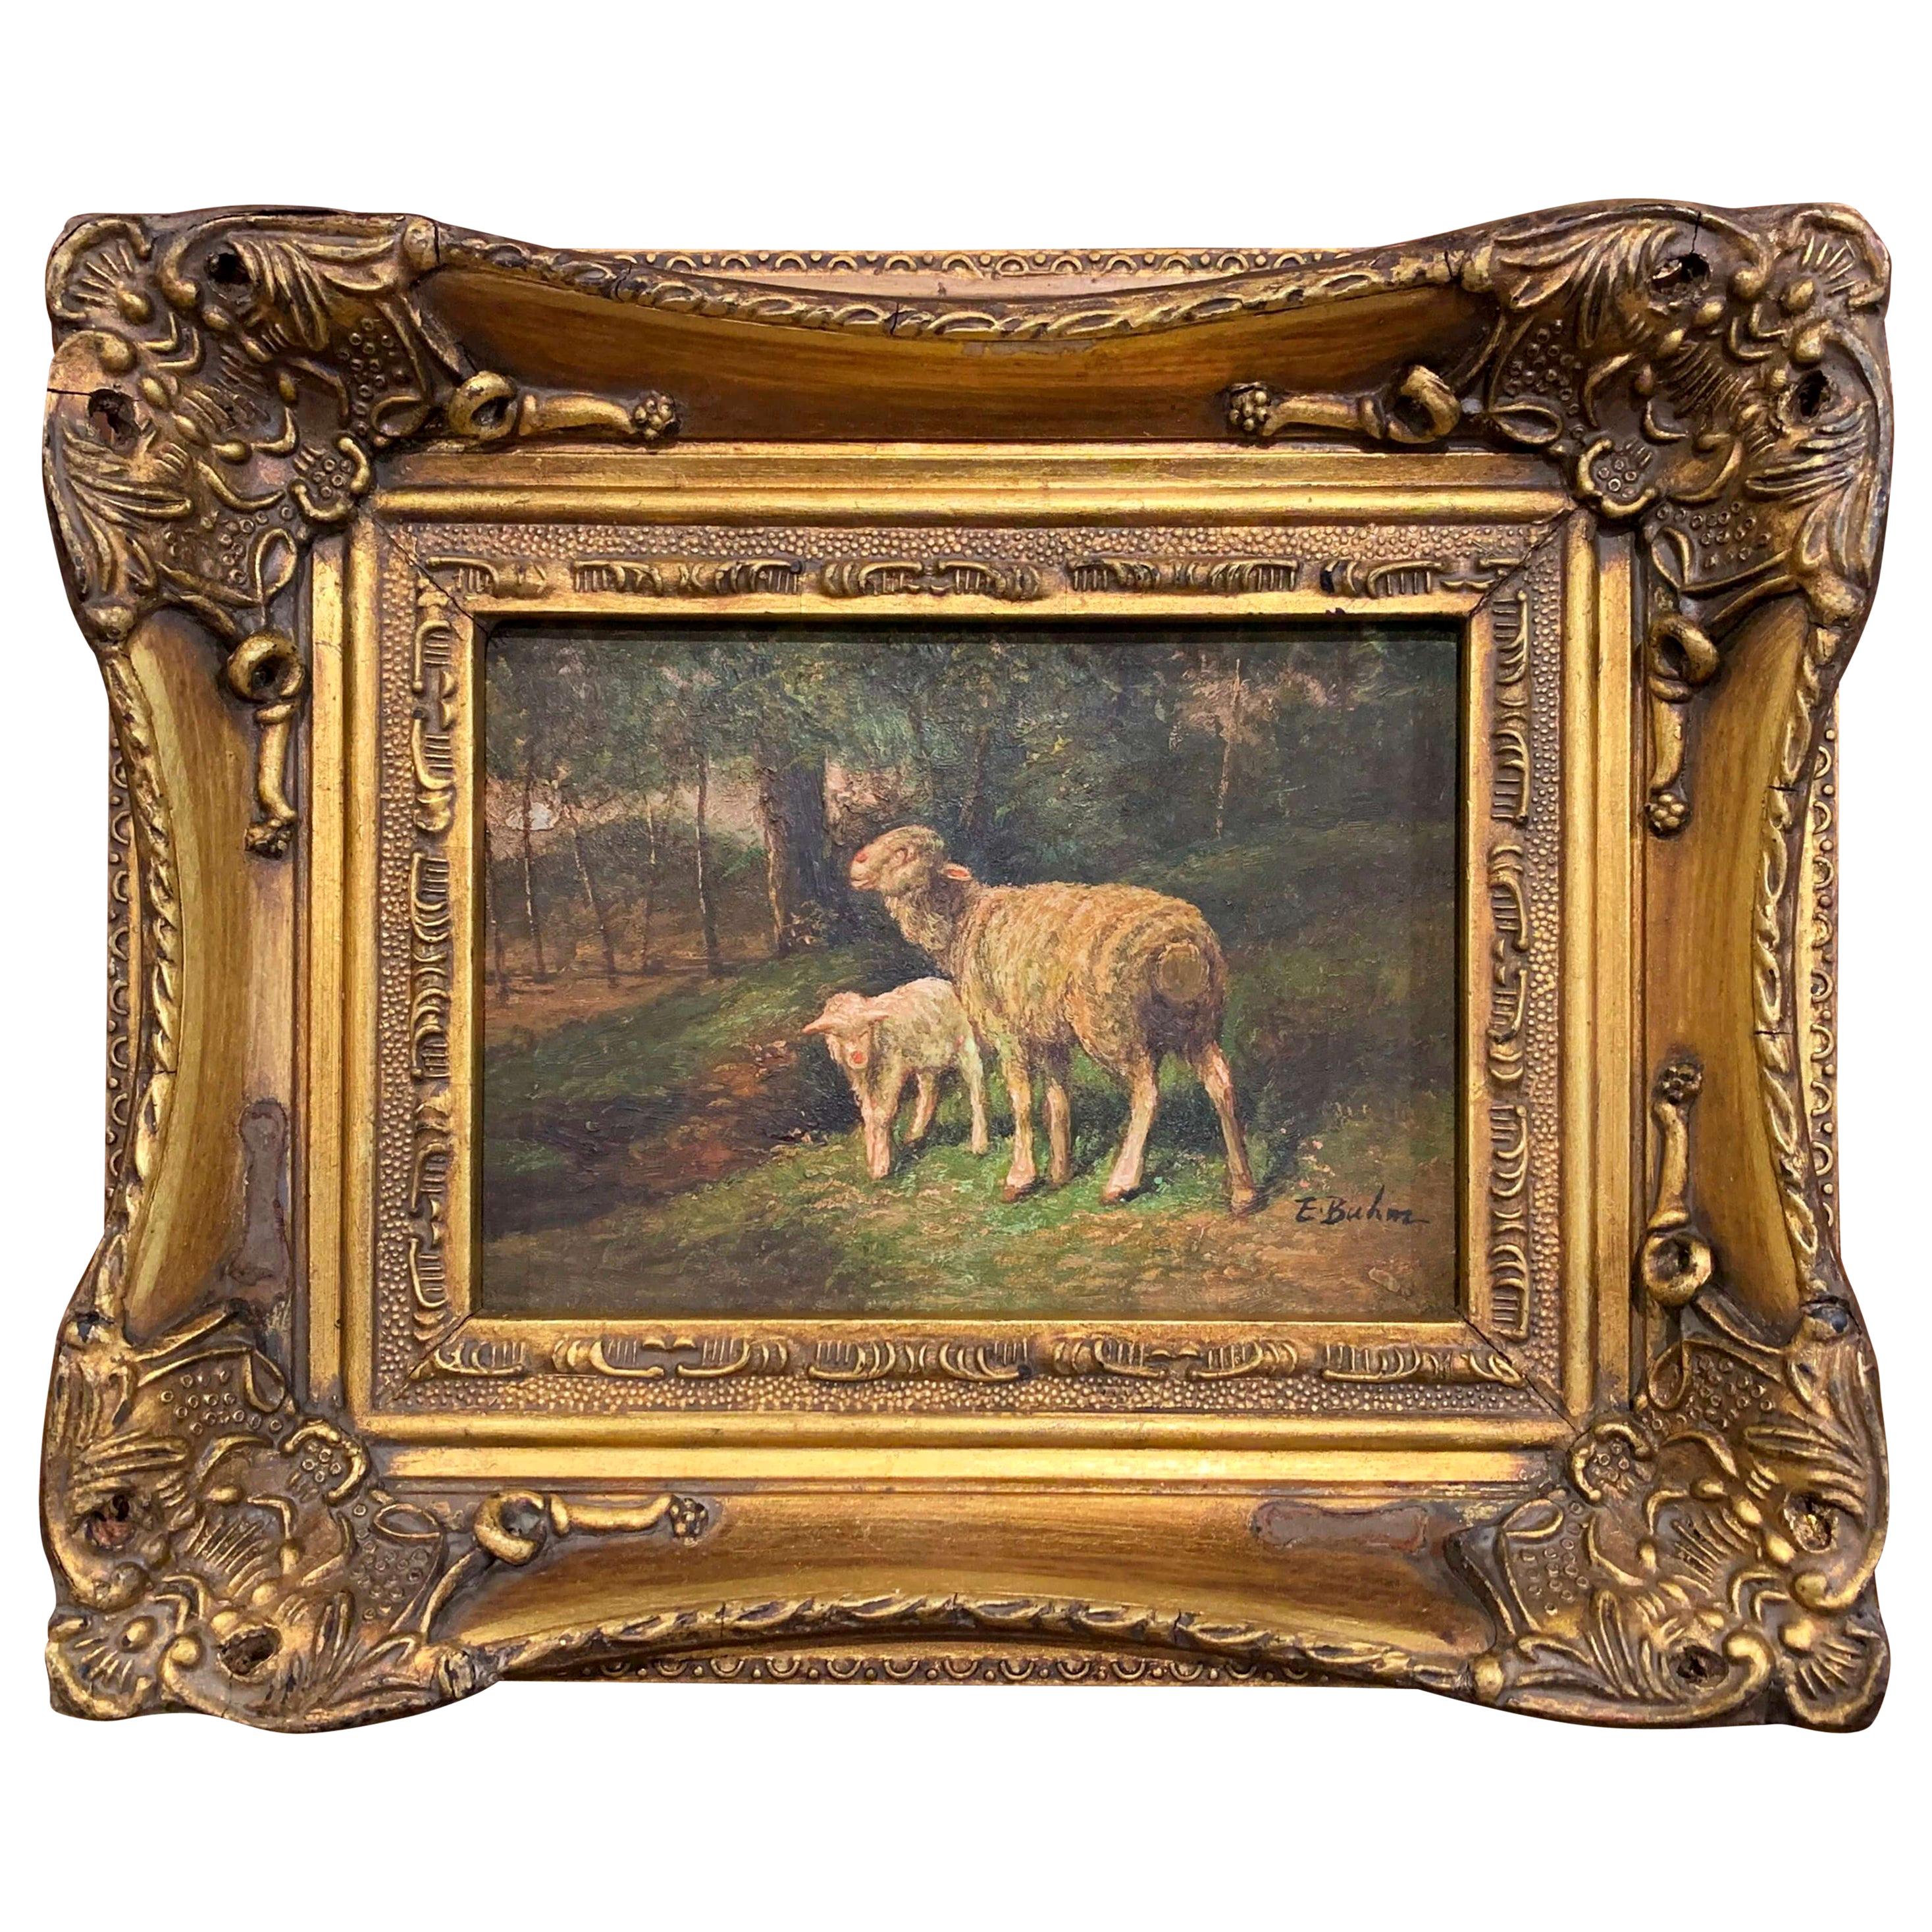 19th Century English Sheep Painting on Board in Gilt Frame Signed E. Buhm